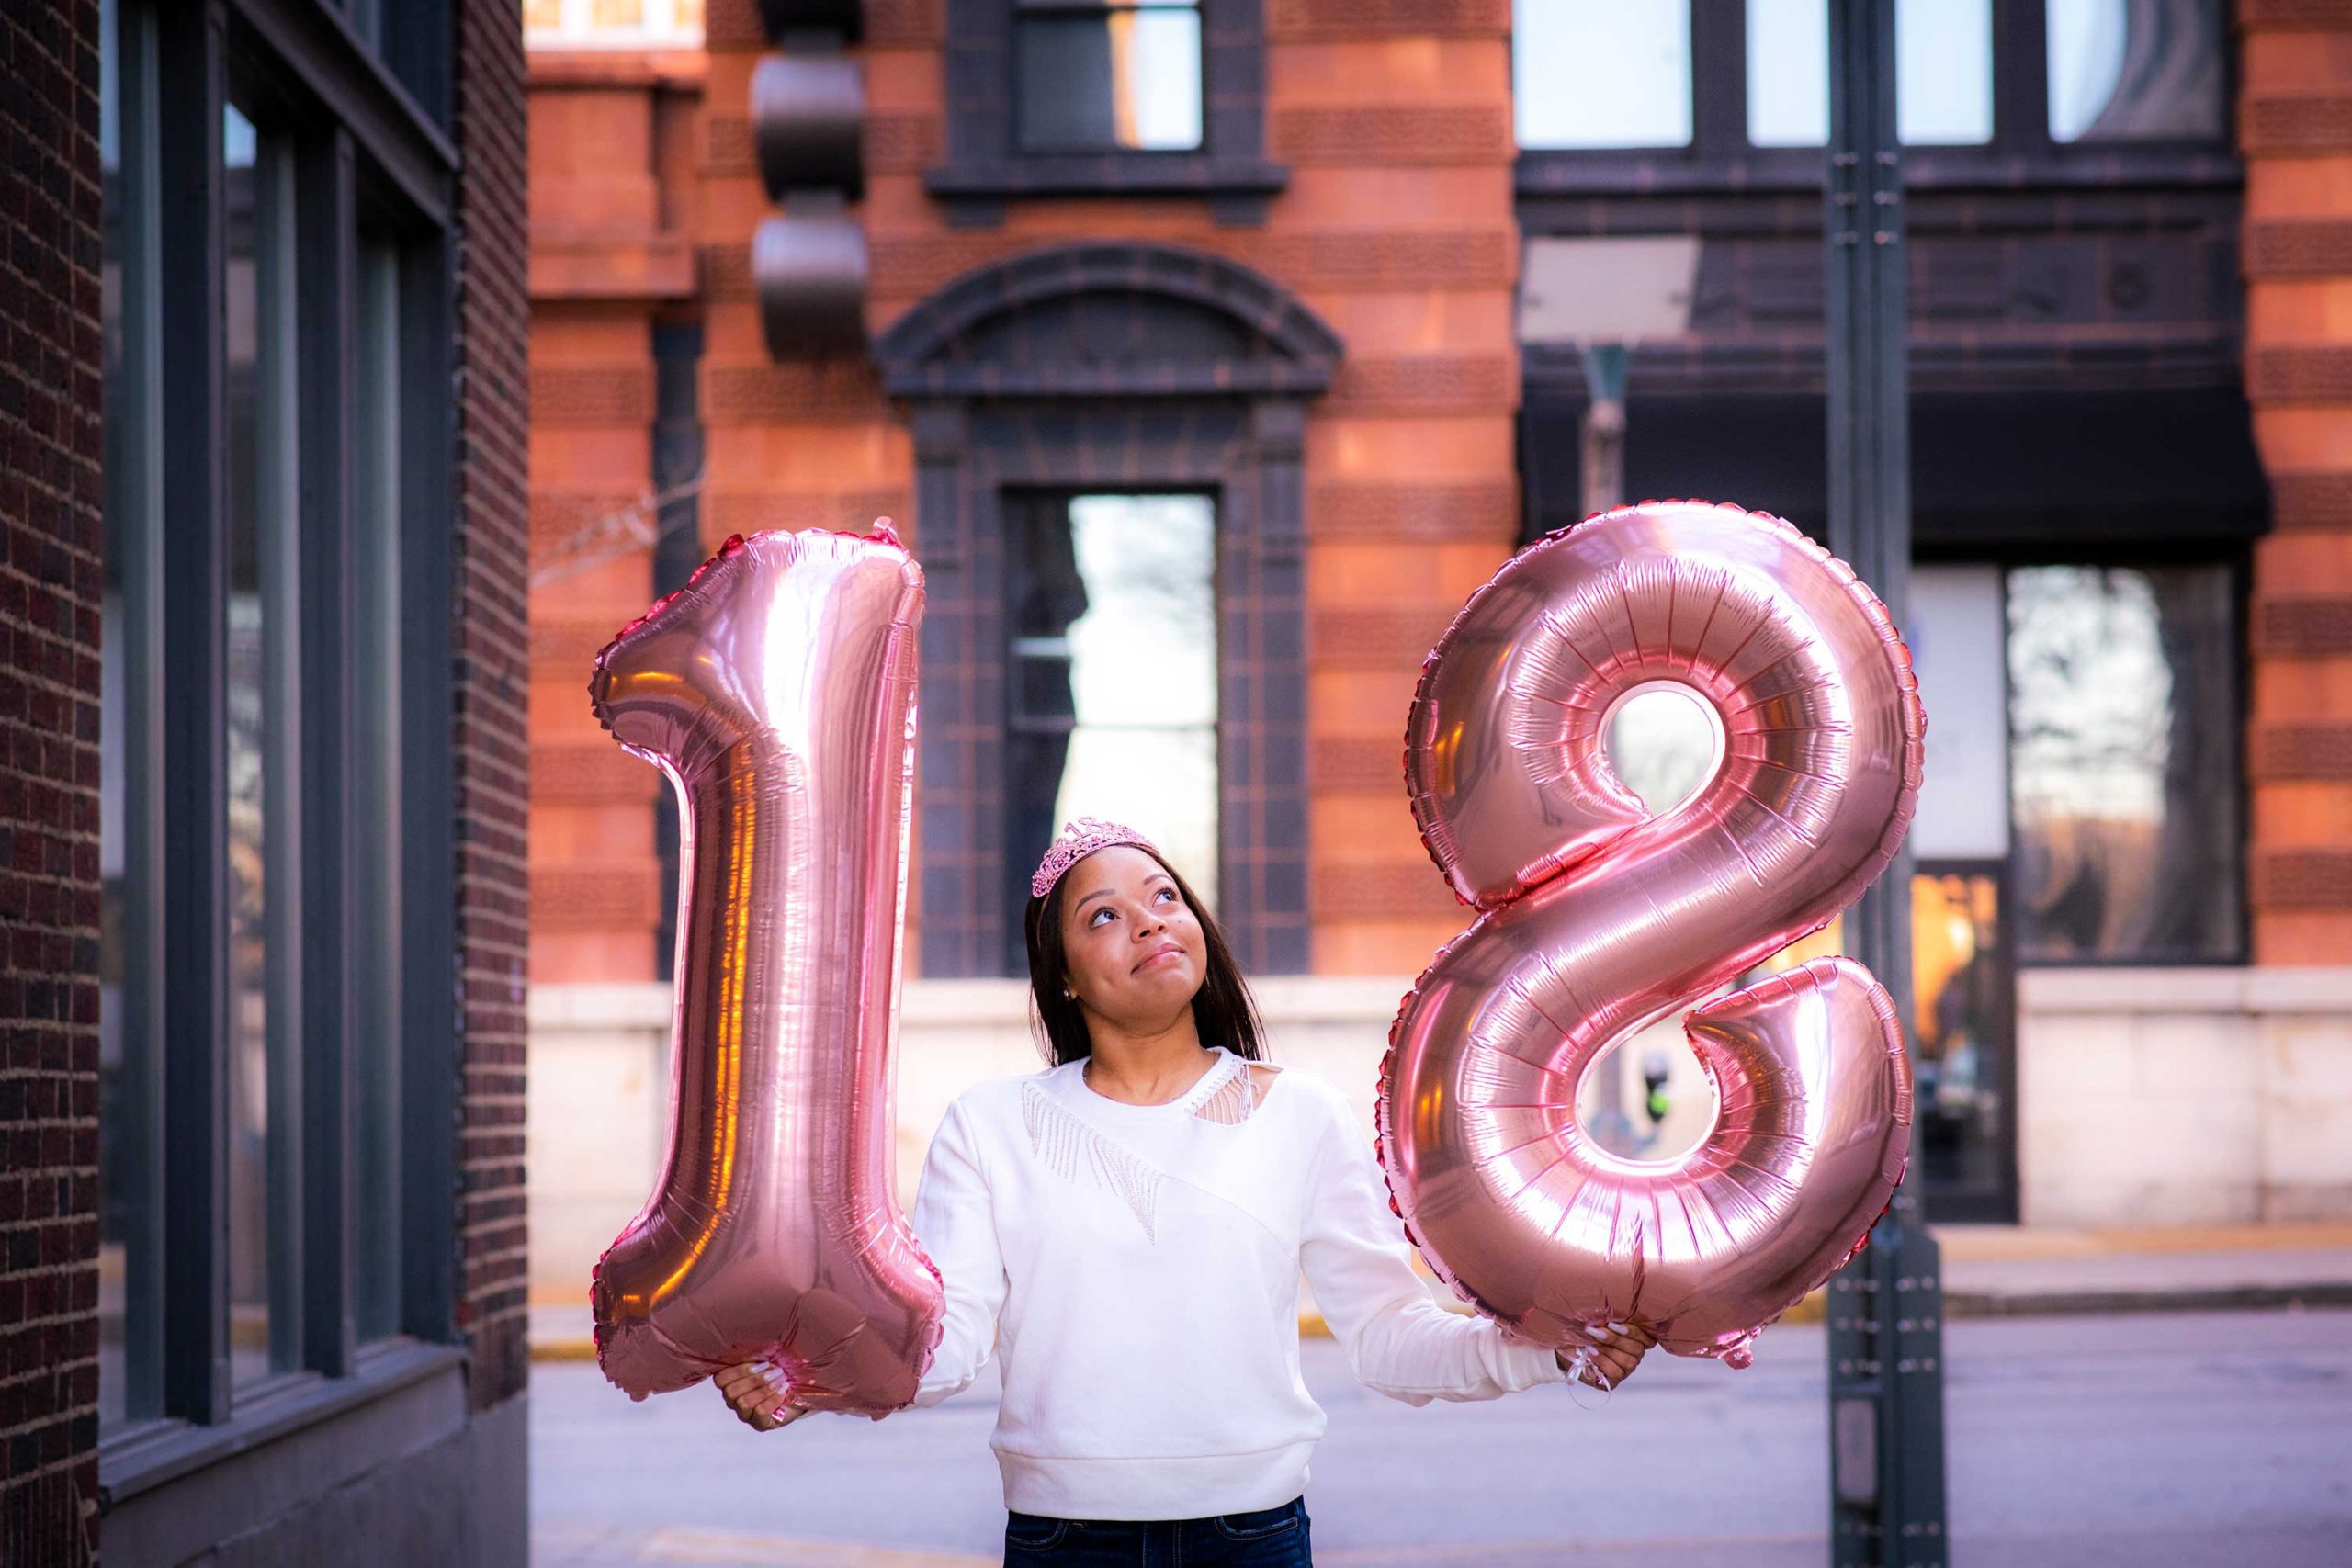 Girl in an urban setting holding up large number balloons that say "18" in celebration of her 18th birthday.